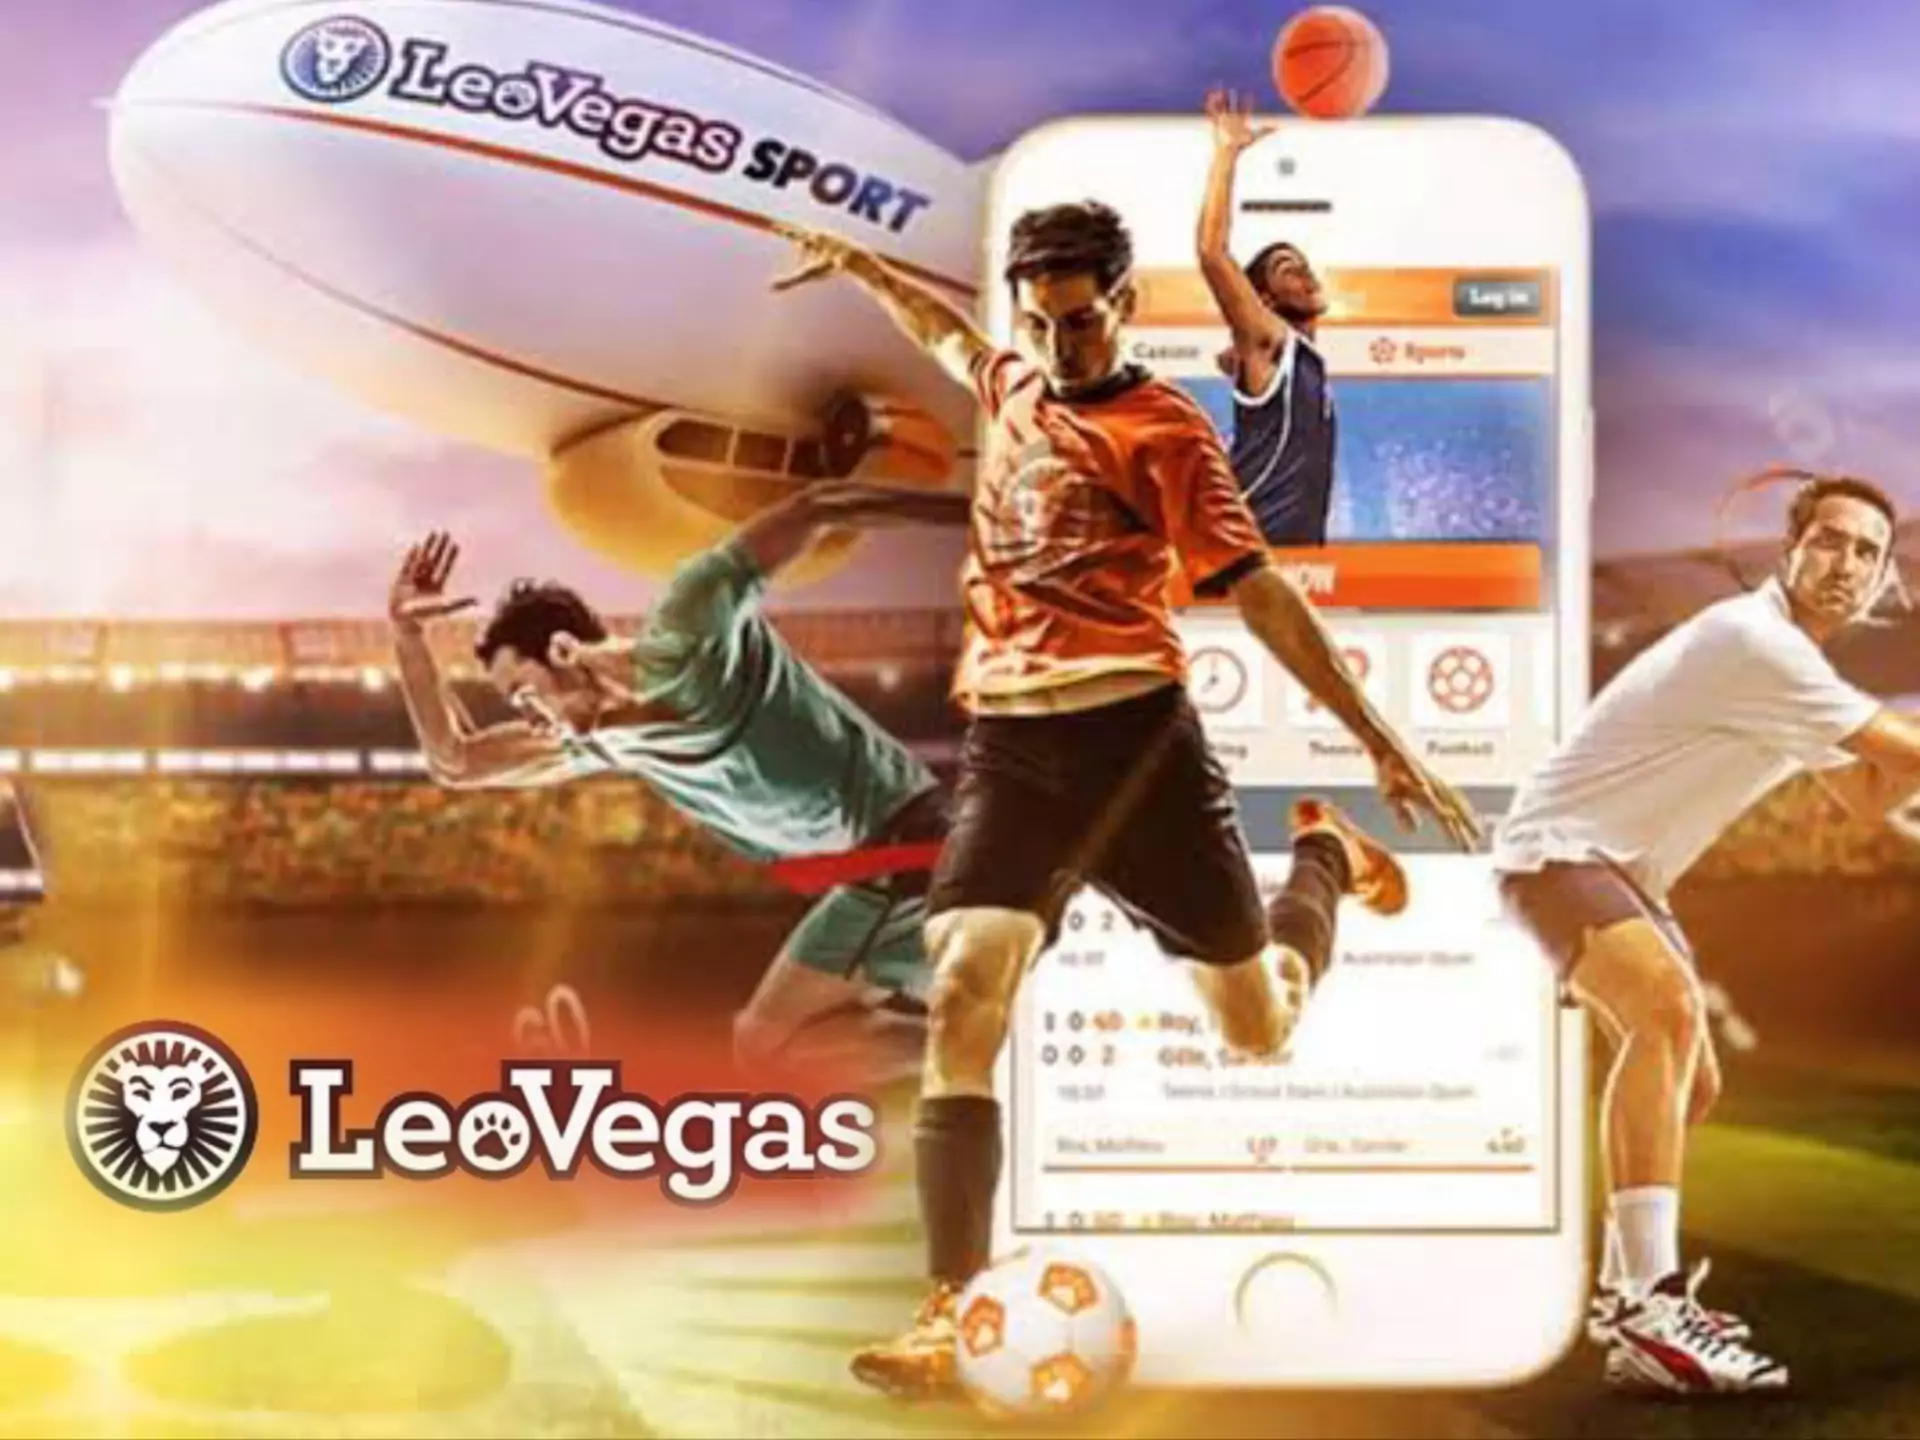 You will find profitable odds on different sports at LeoVegas.